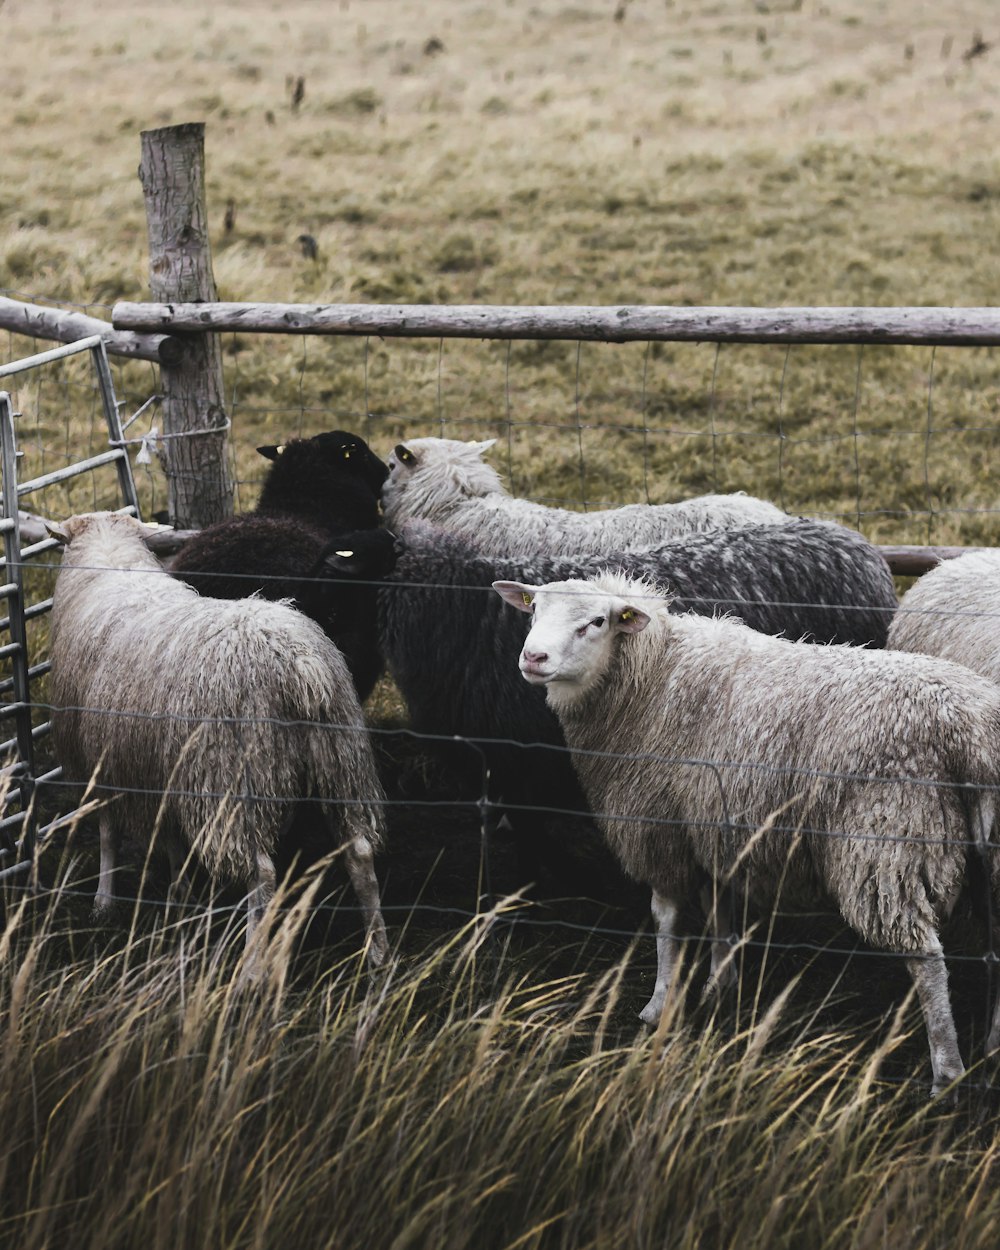 group of sheep in cage